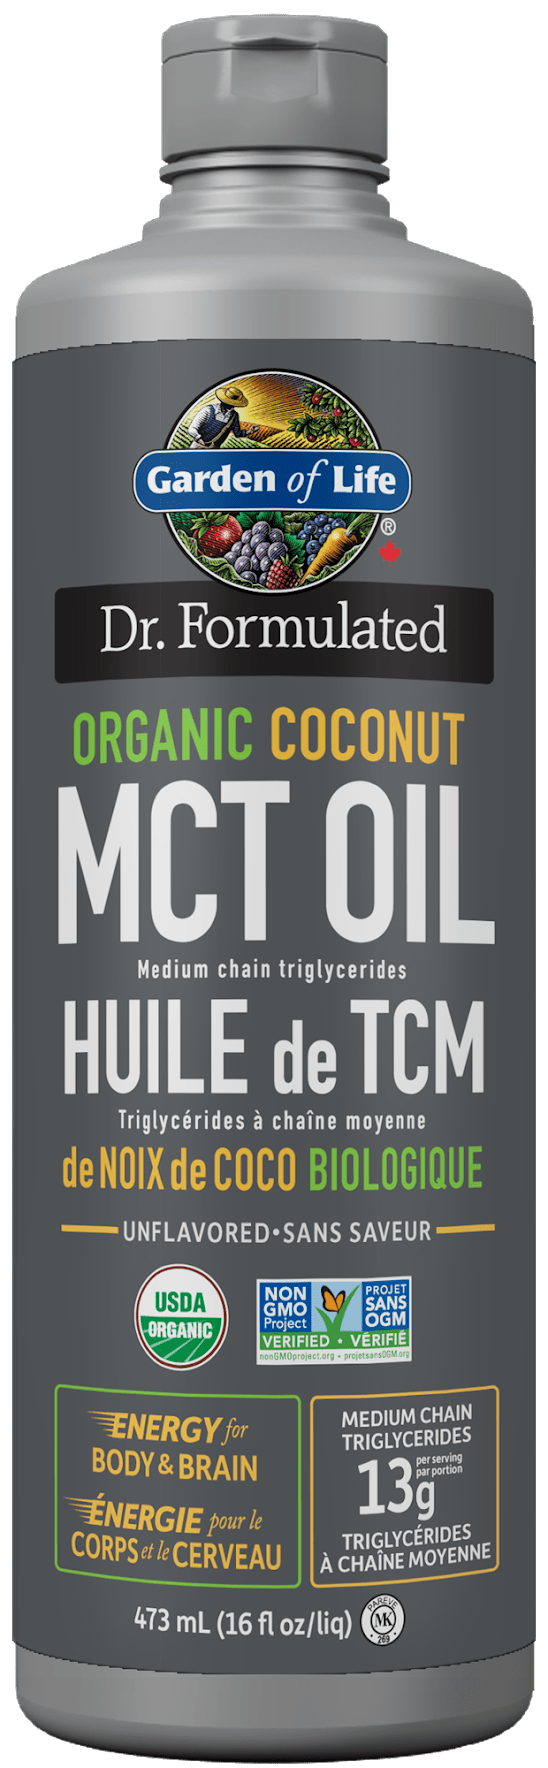 Garden of Life Dr. Formulated Organic Coconut MCT Oil 473ml